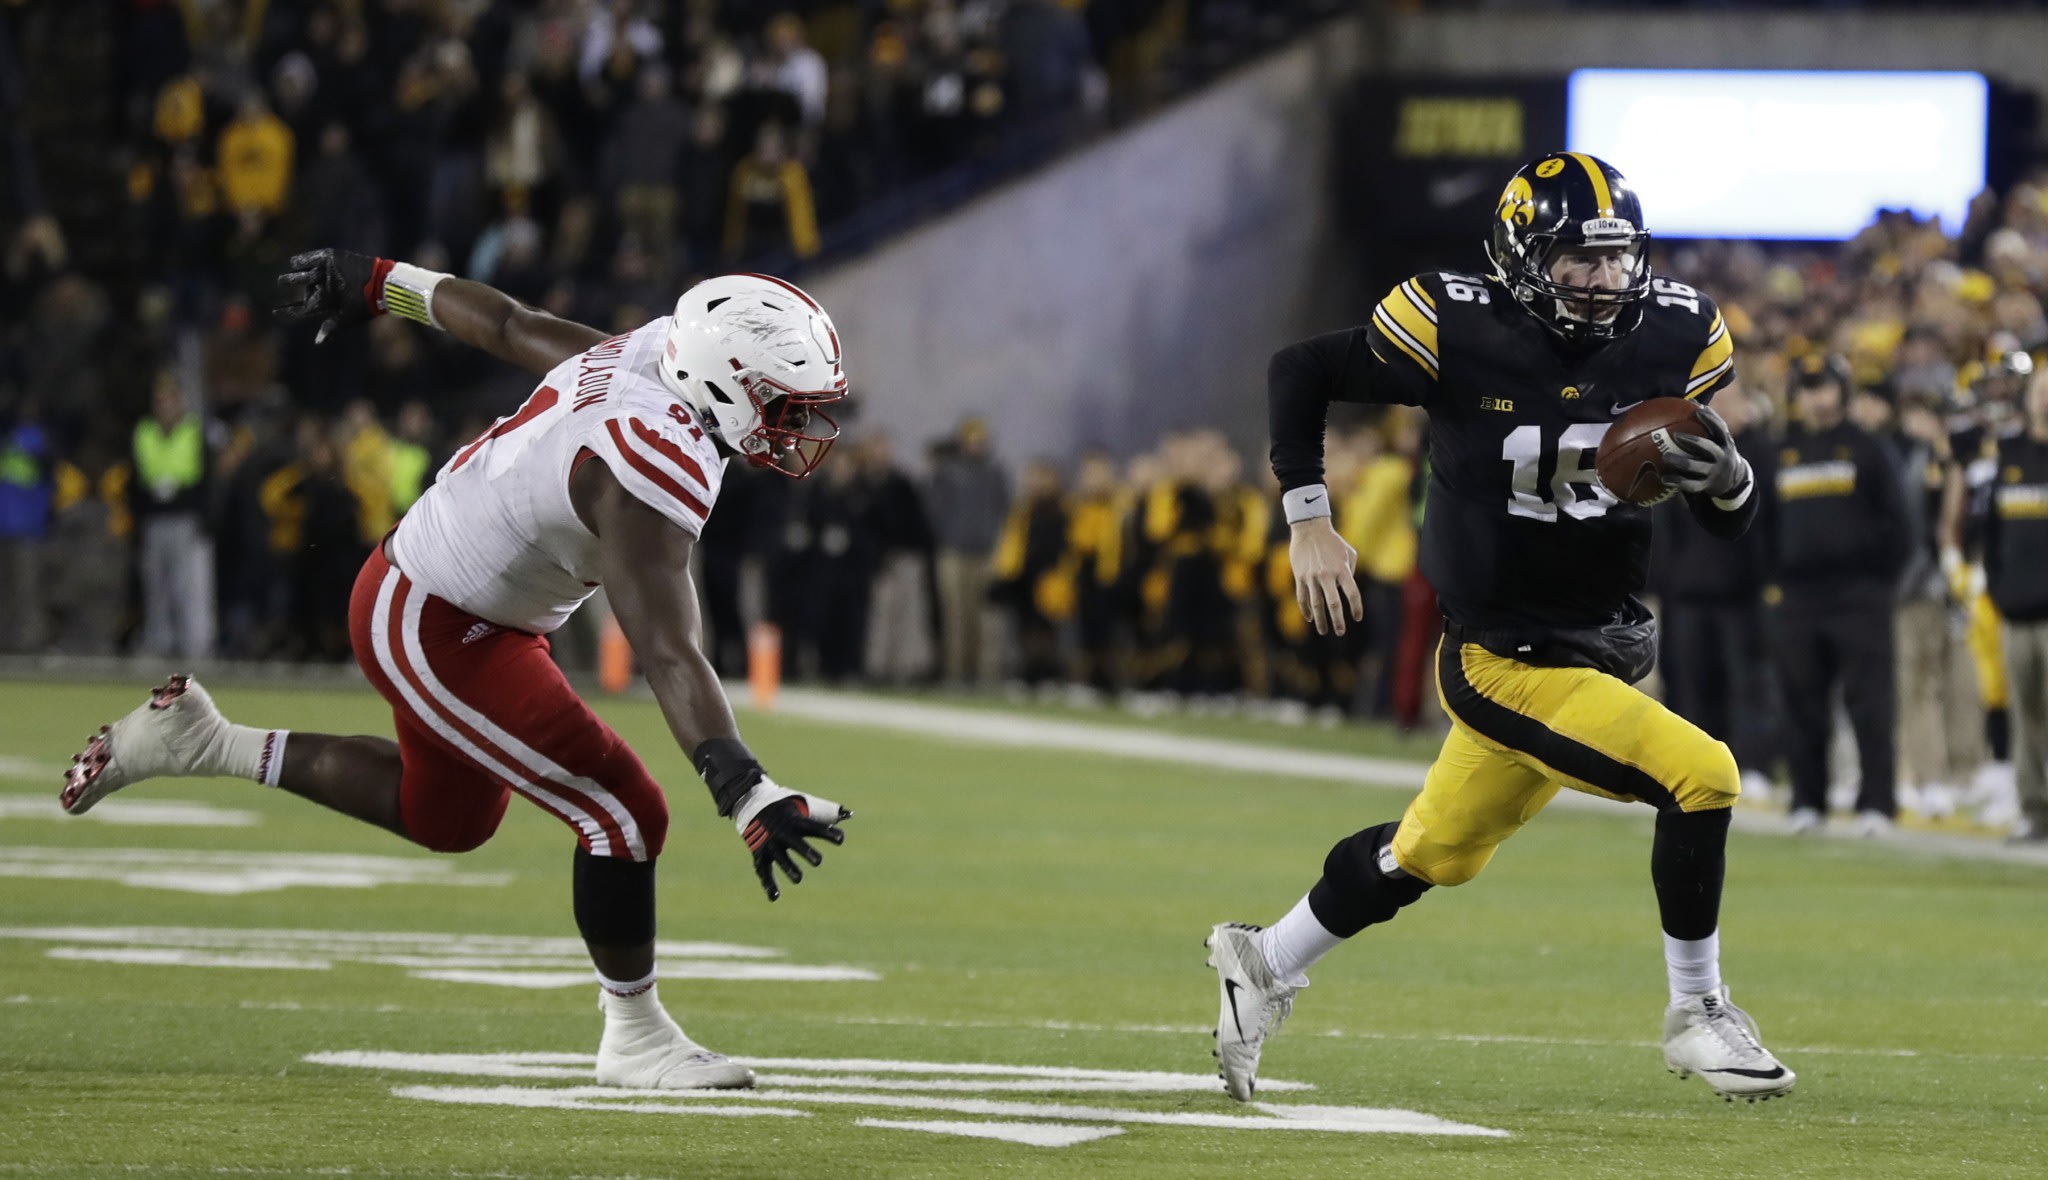 Image result for Iowa blows out Nebraska, ruining Big Ten West title shot for Huskers